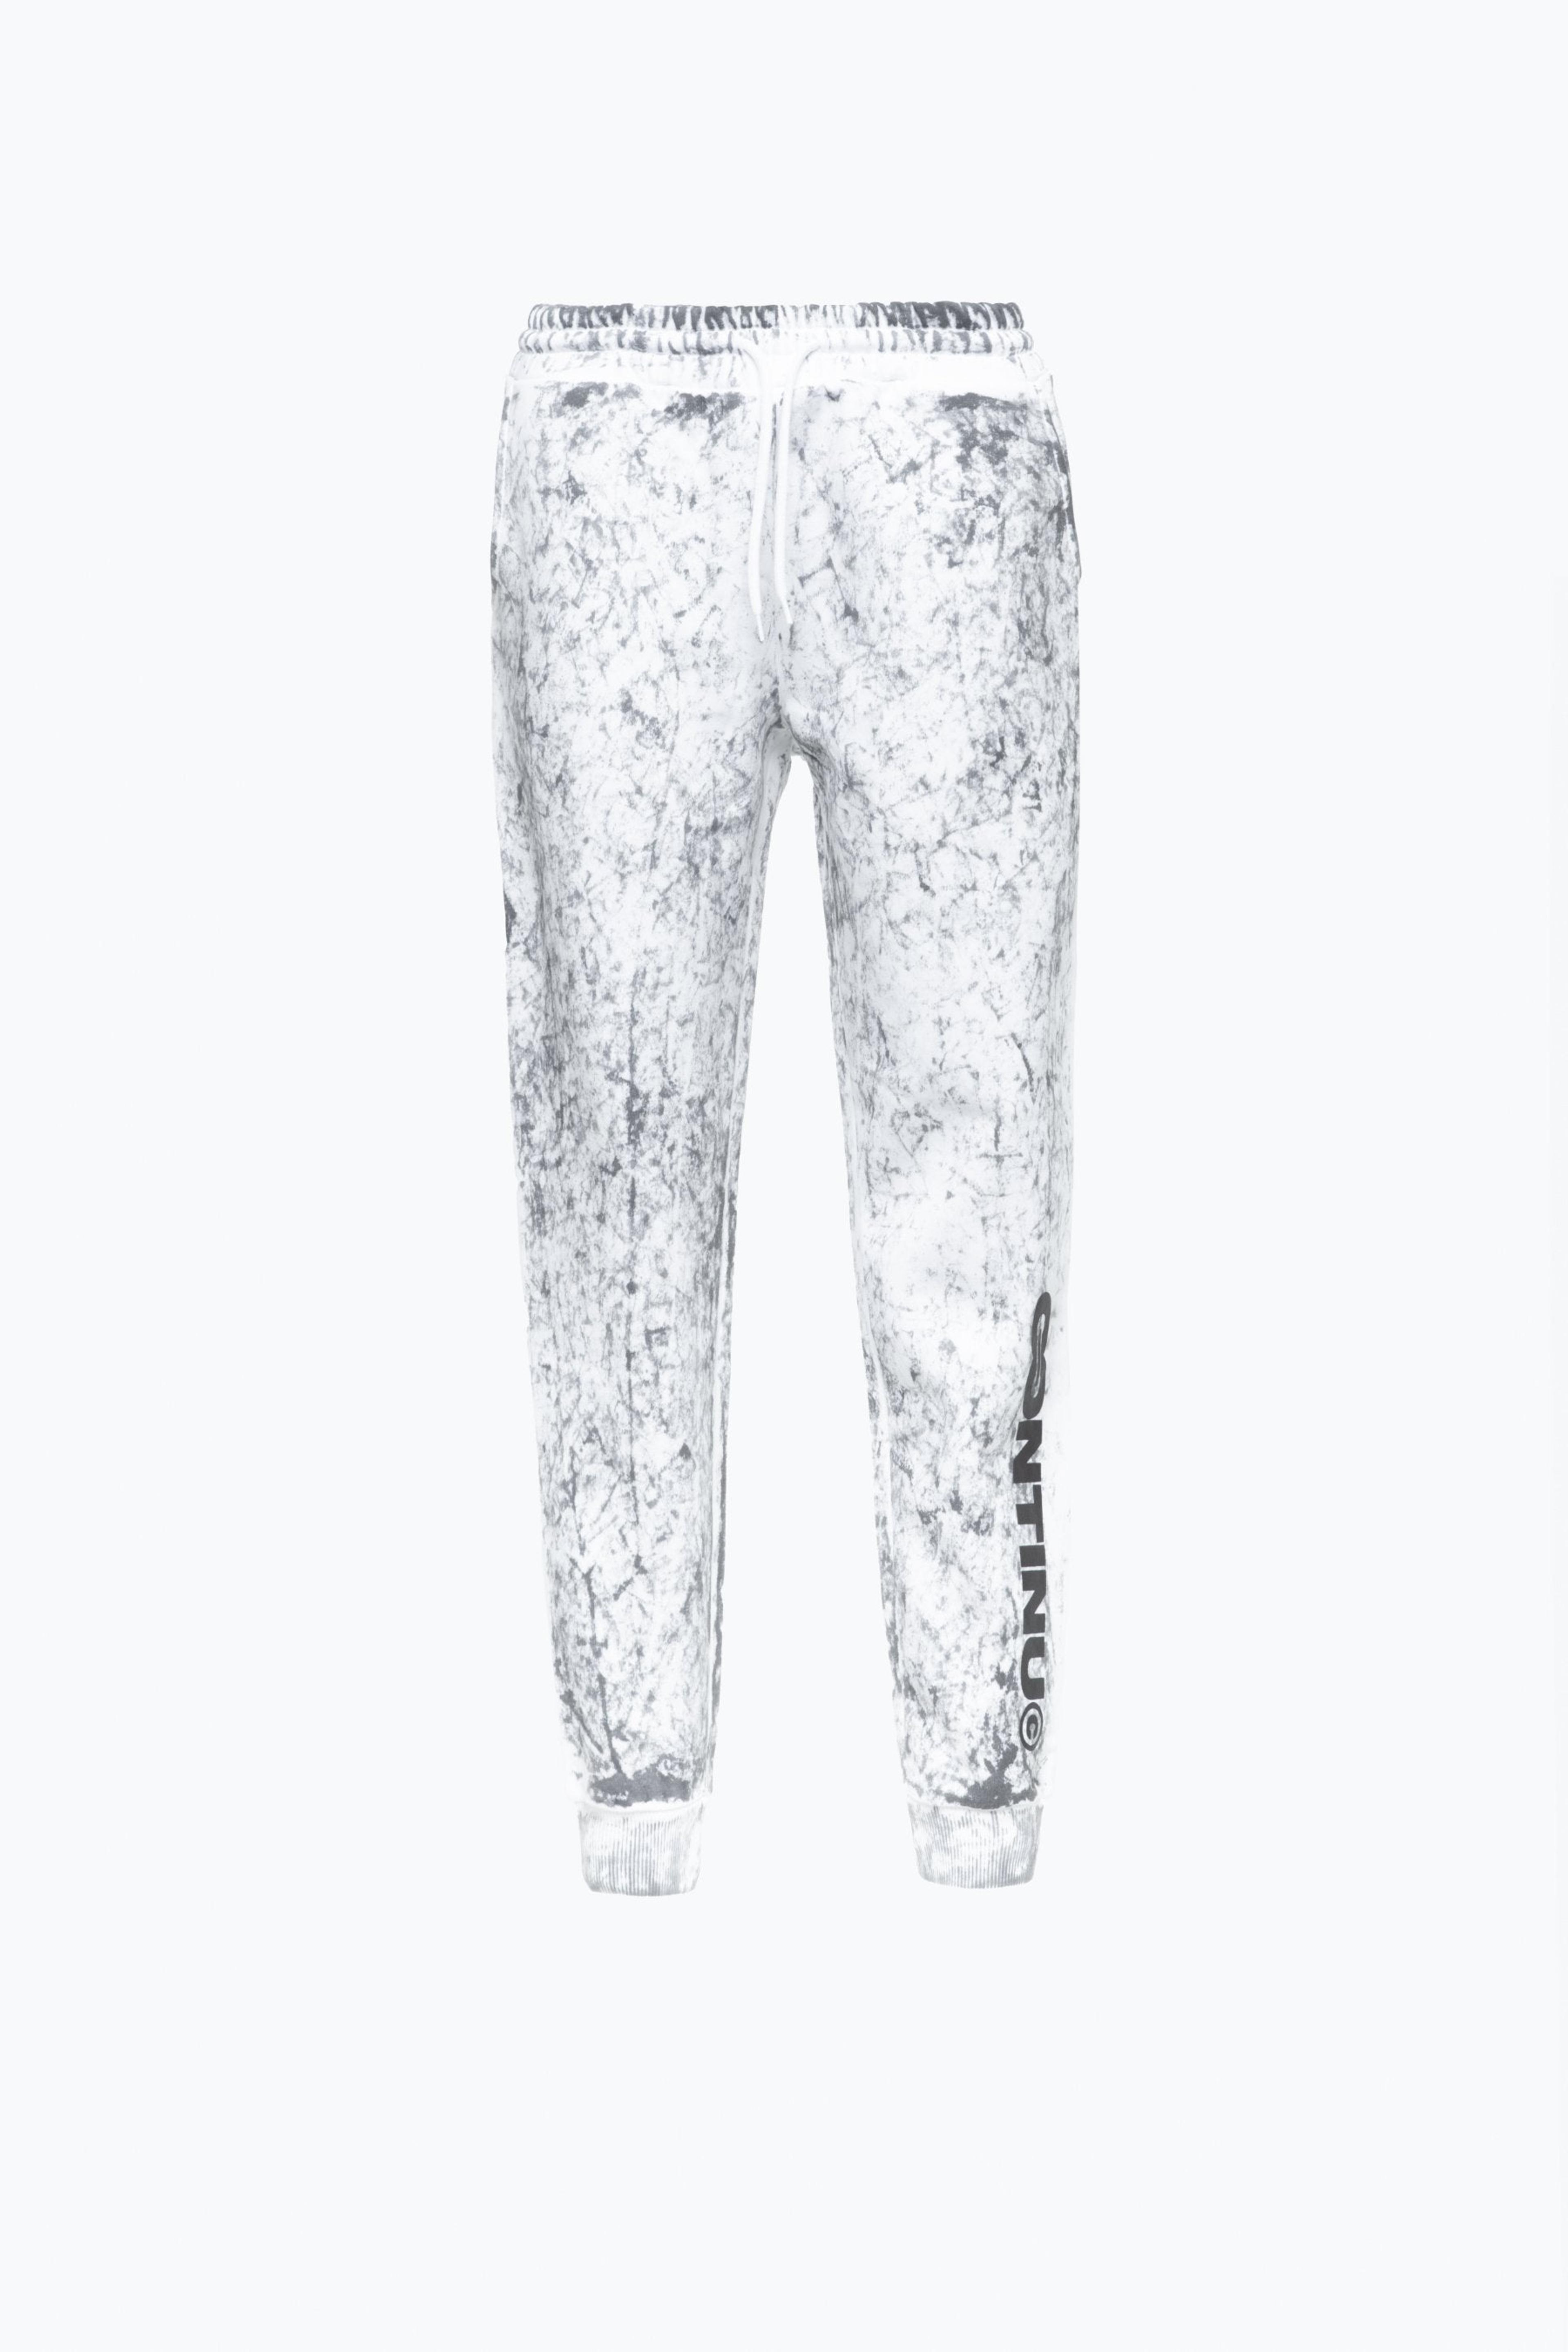 Alternate View 5 of CONTINU8 WHITE TIE DYE JOGGERS